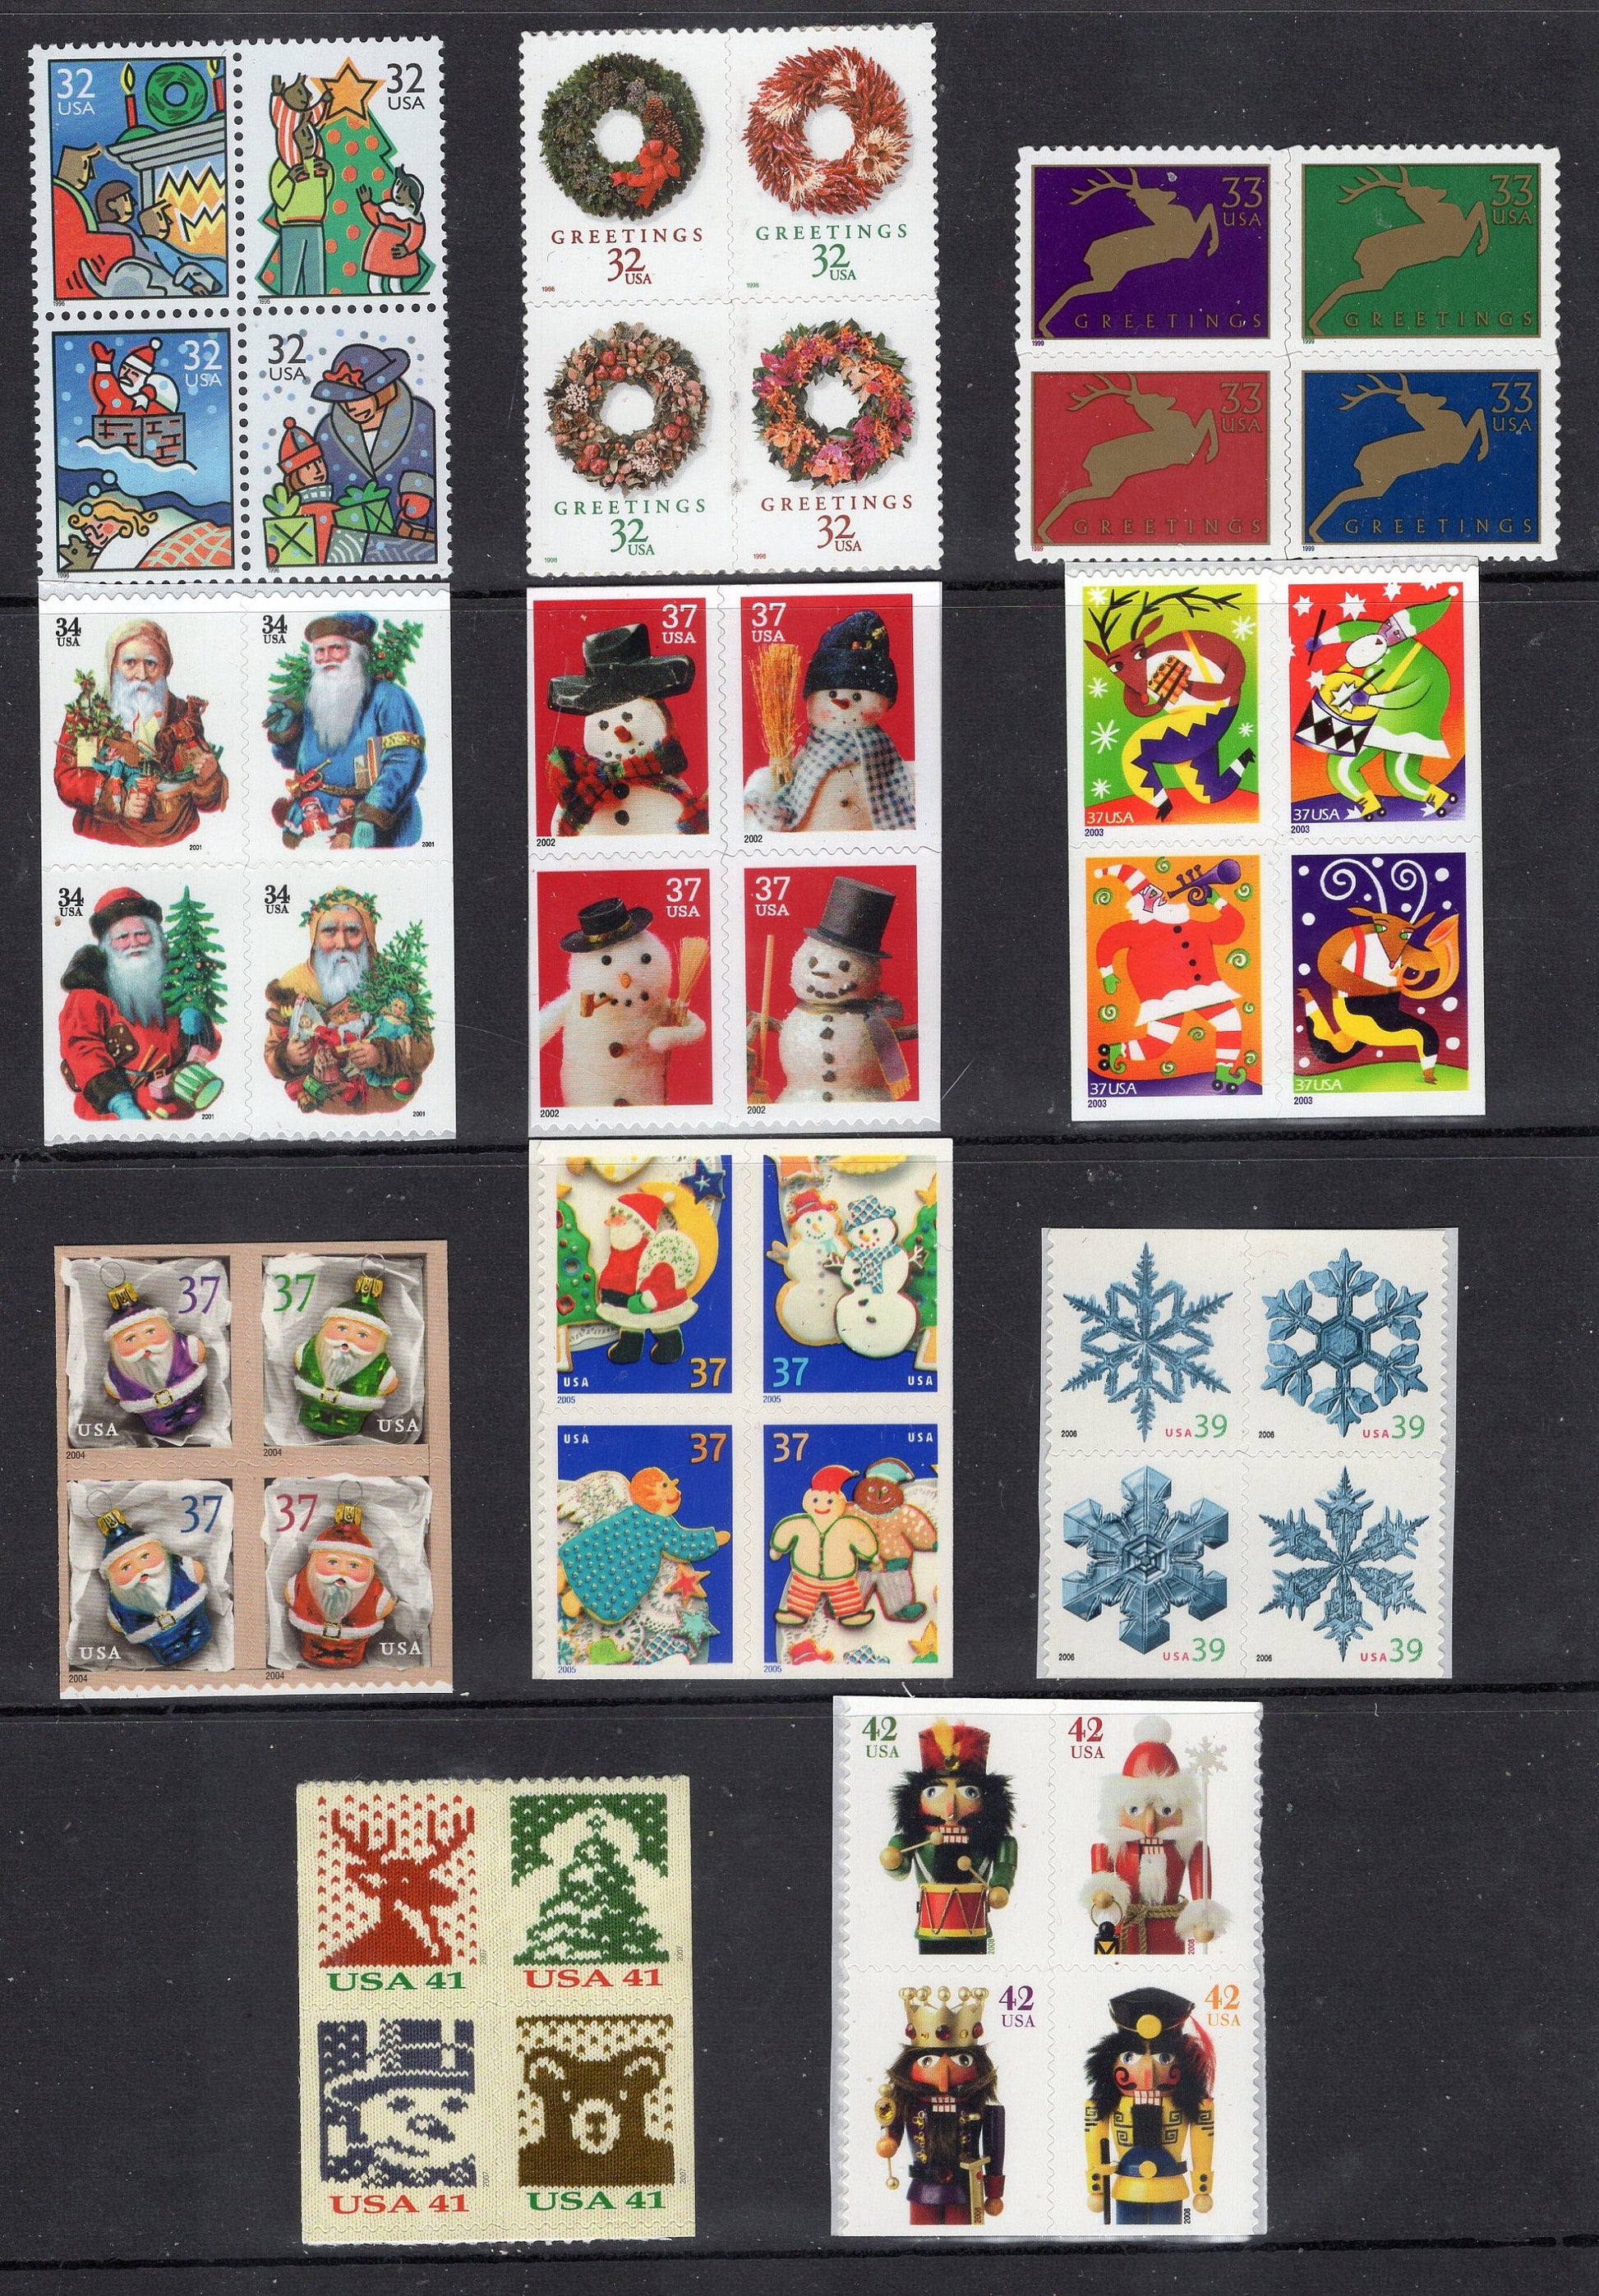 SPECTACULAR CHRISTMAS COLLECTION #2 of 128 Mint Bright USA Stamps - 3 Scans - Rarely Seen - Great Gift - Issued in 1962/2008 -